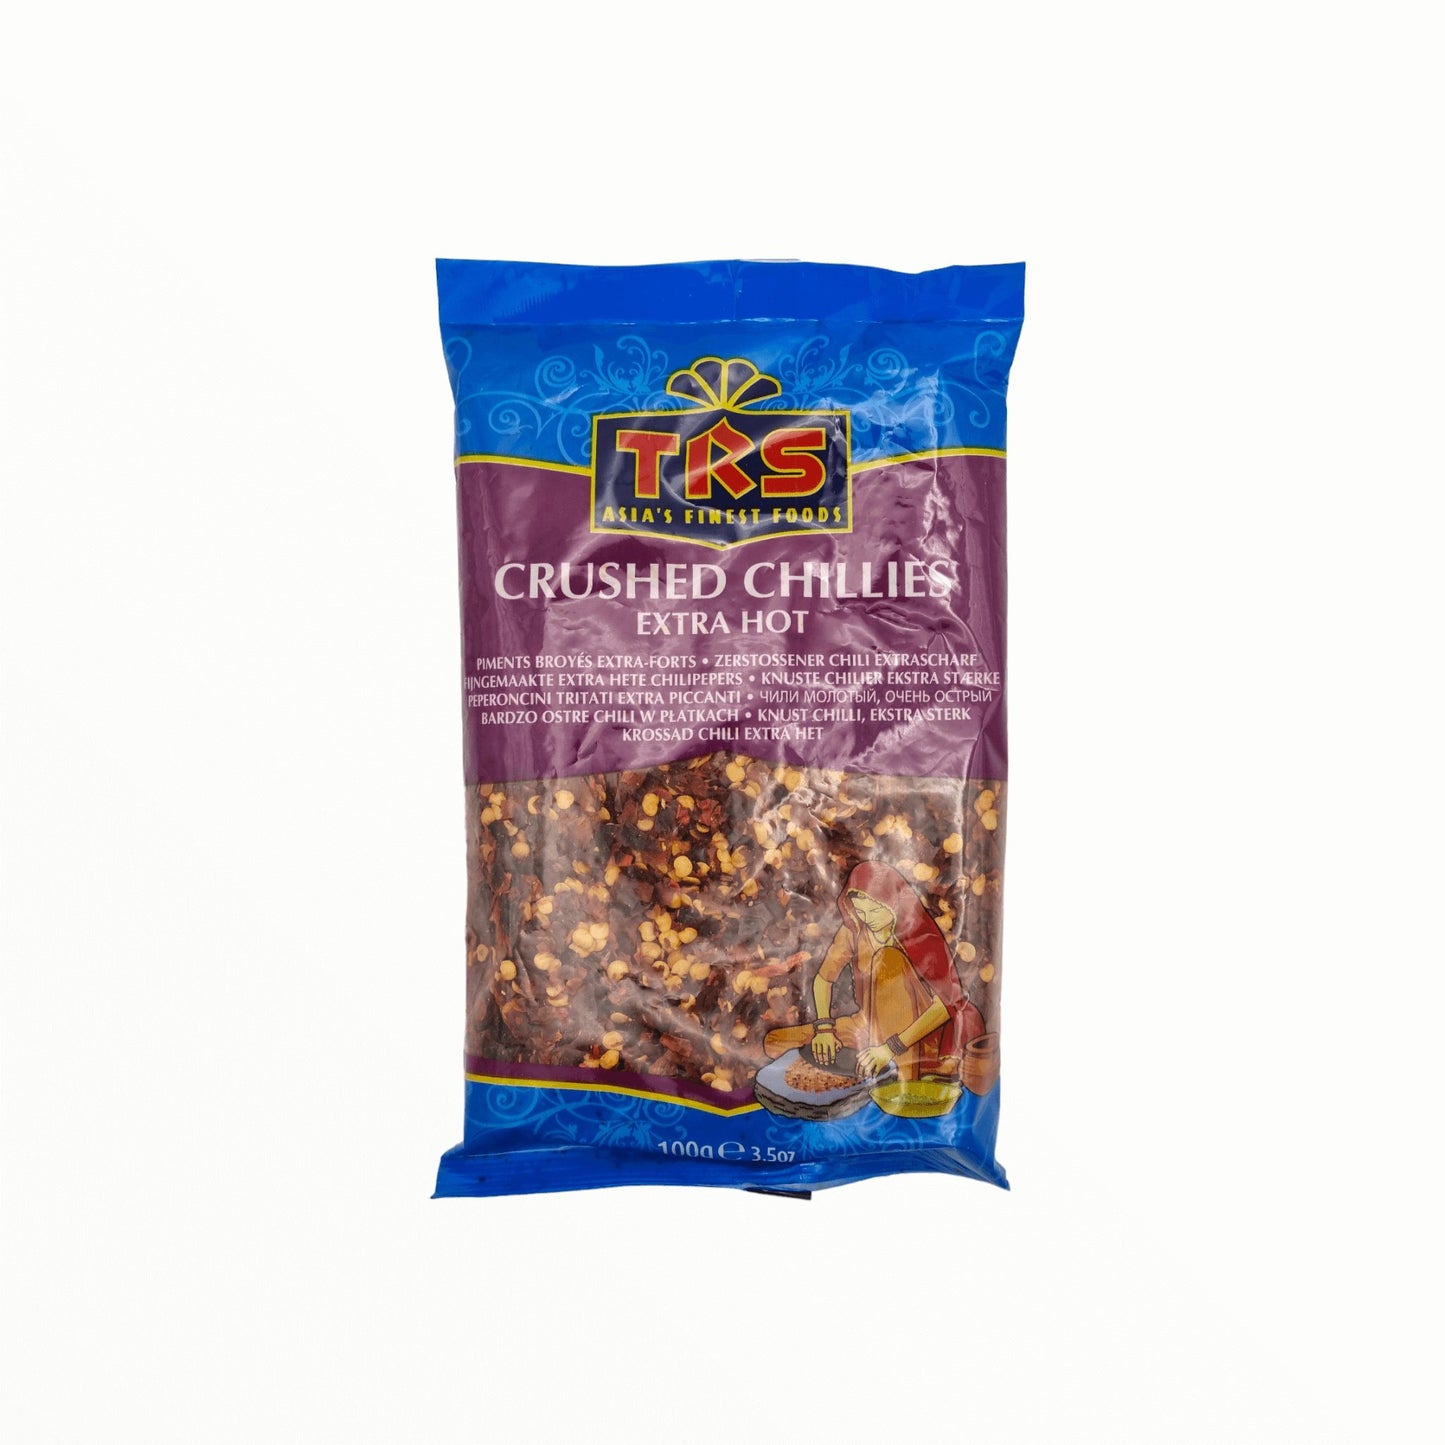 Crushed Chillies extra scharf 100g - Mabuhay Pinoy Asia Shop